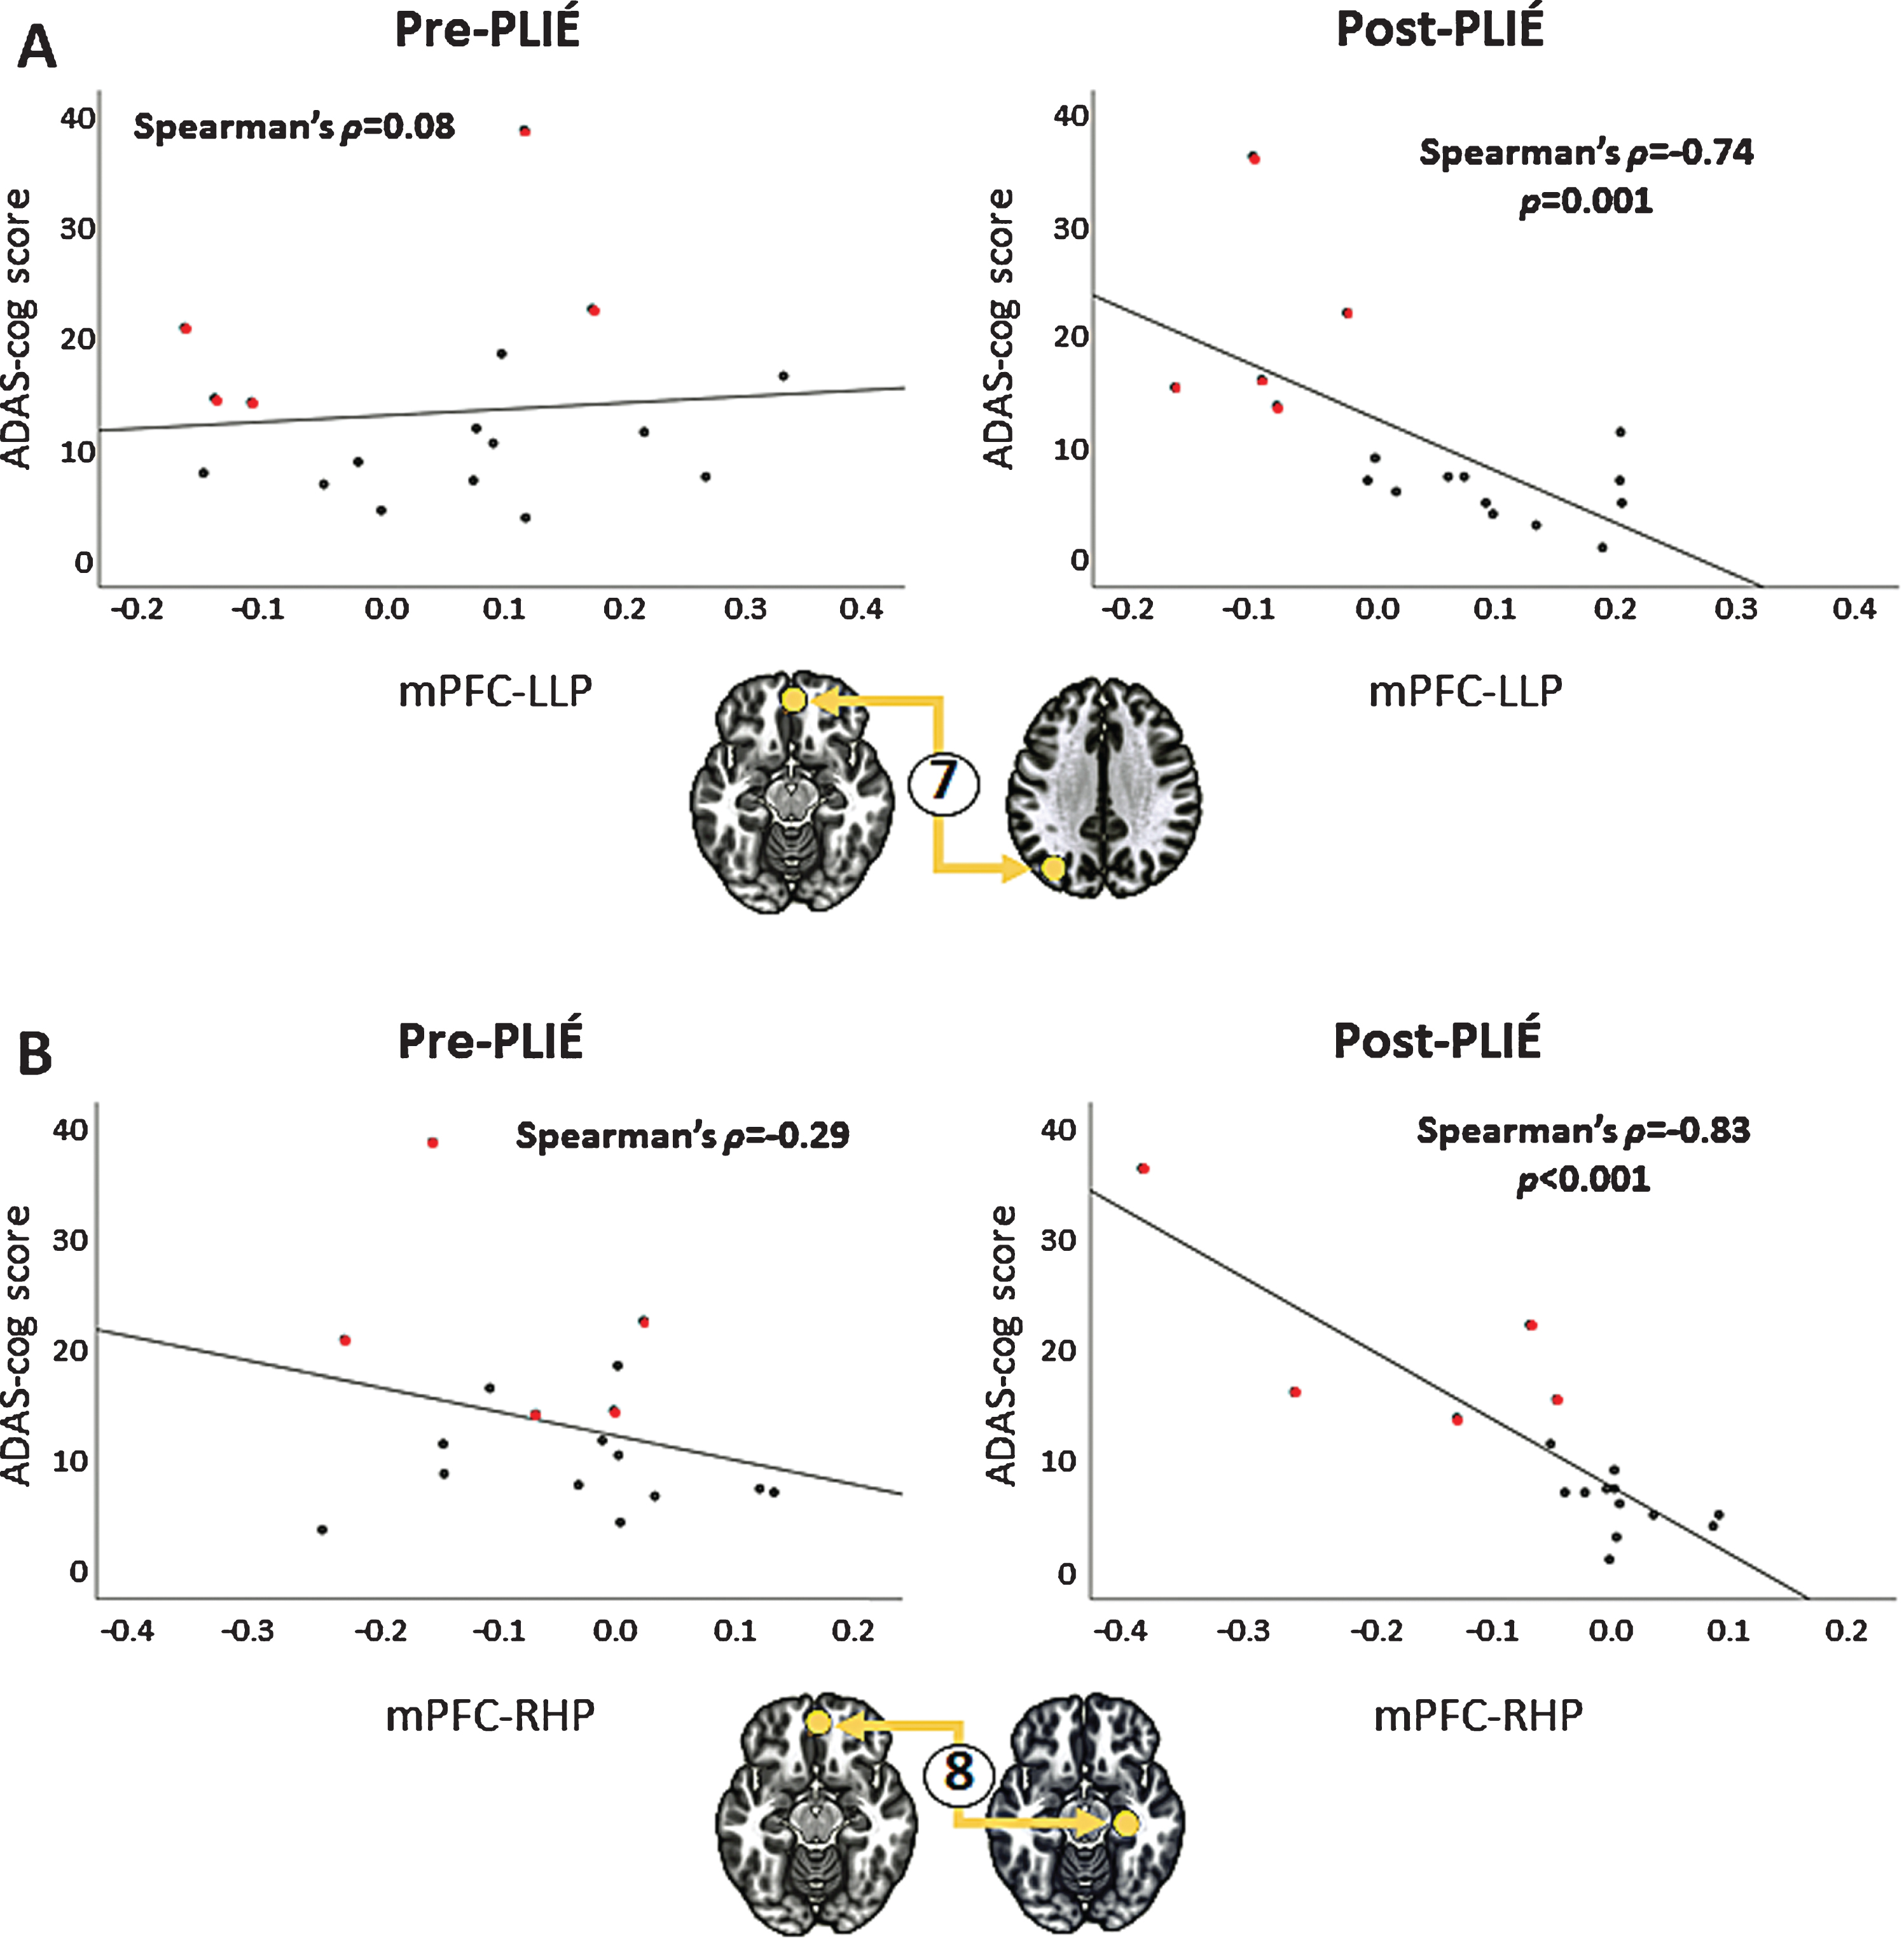 Relationship between ADAS-cog scores and the strength of connection between the medial prefrontal cortex (mPFC) and (A) left lateral parietal cortex (LLP), connection #7 in Fig. 3, and (B) the right hippocampus (RHL), connection #8 in Fig. 3, after PLIÉ. Prior to PLIÉ, there were no significant correlations between ADAS-cog scores and the strength of these connections. Red circles represent participants with MCI.